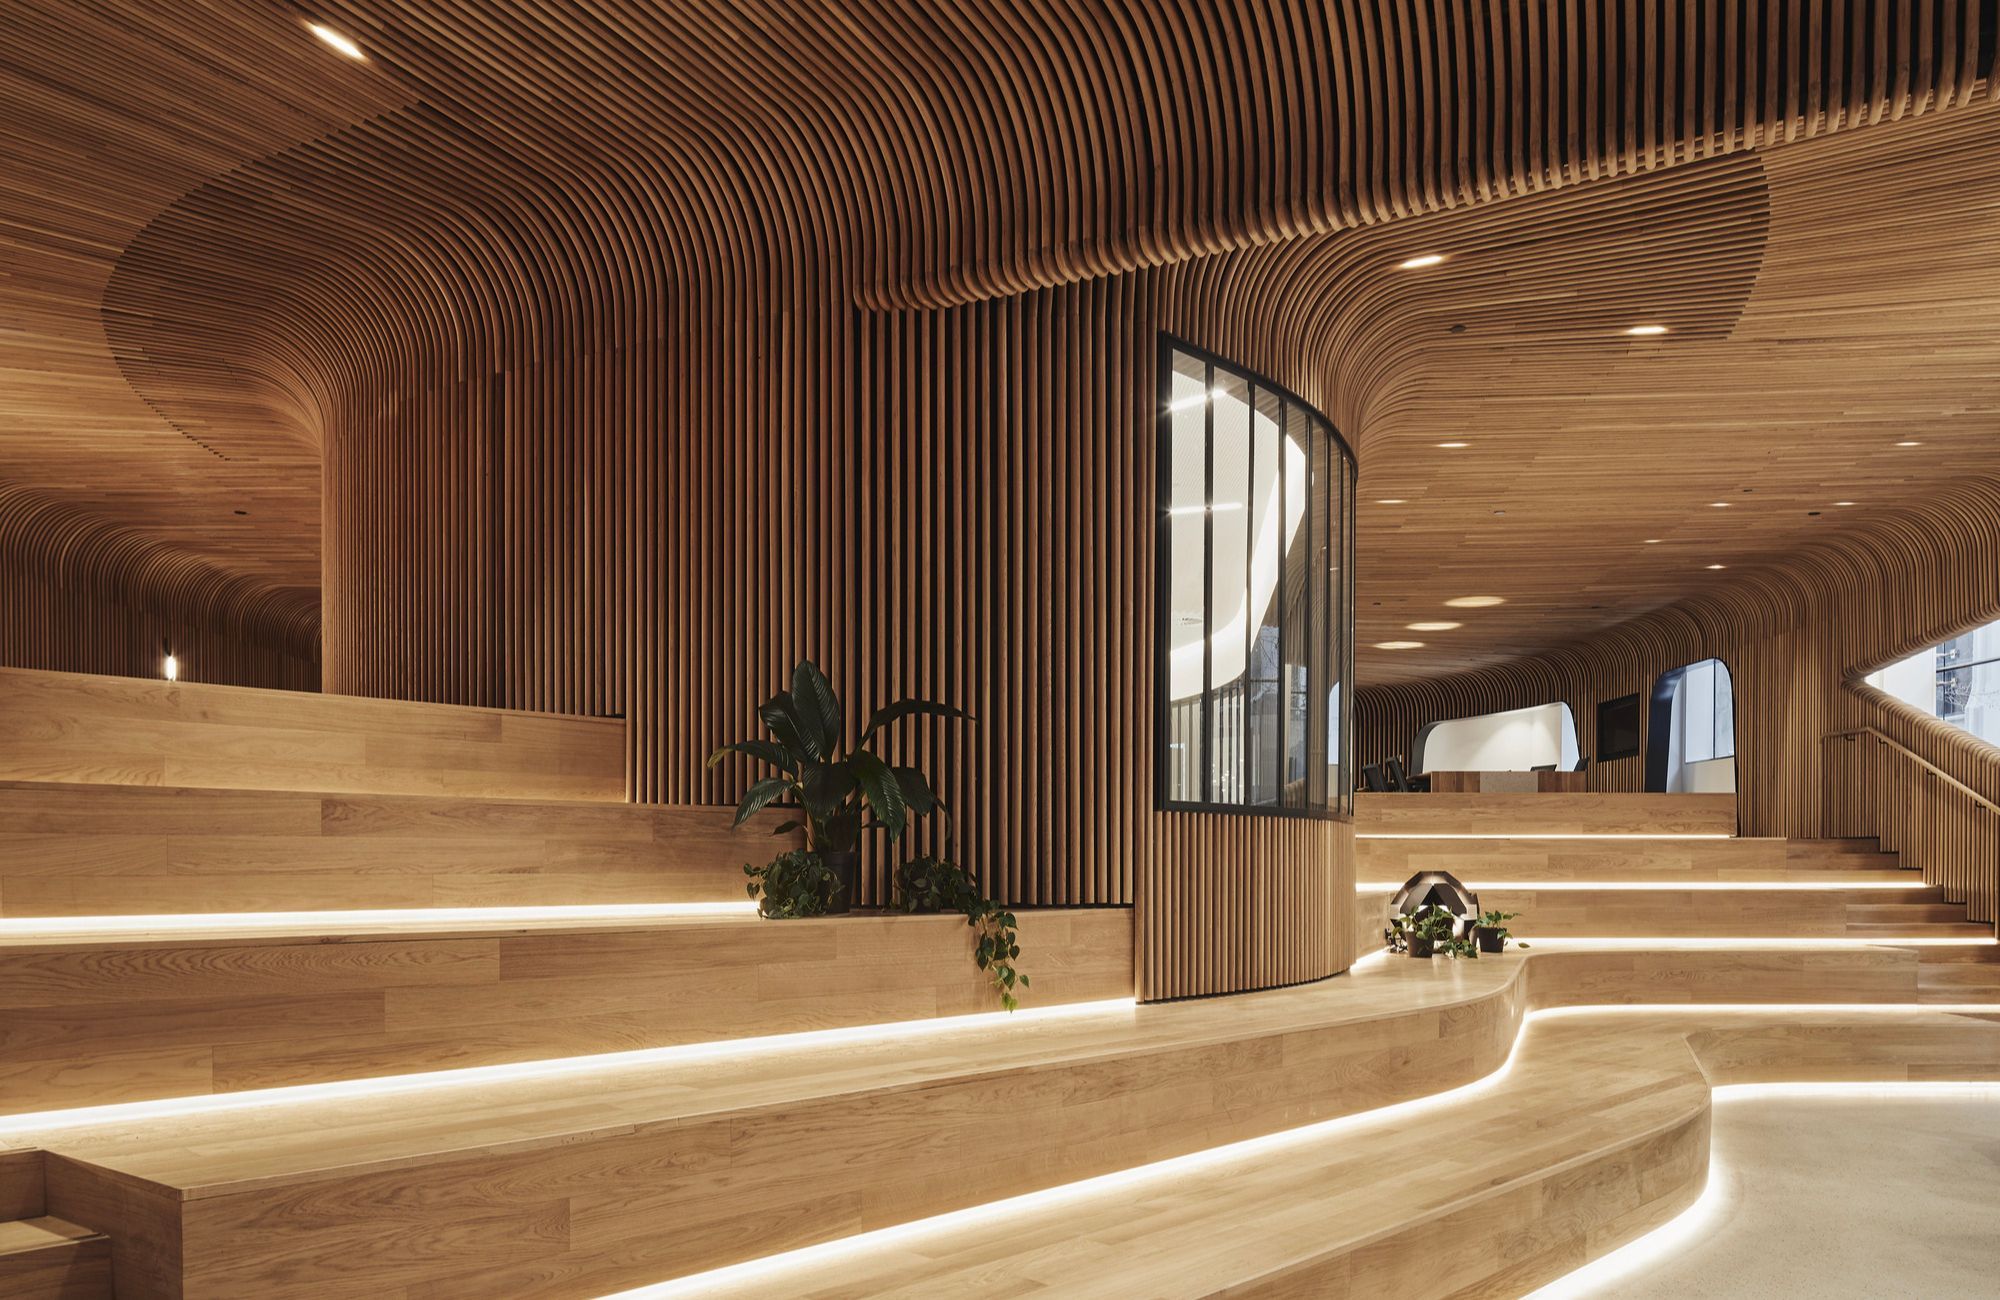 Sculptform Design Studio by Woods Bagot showing timber interior and timber seated steps